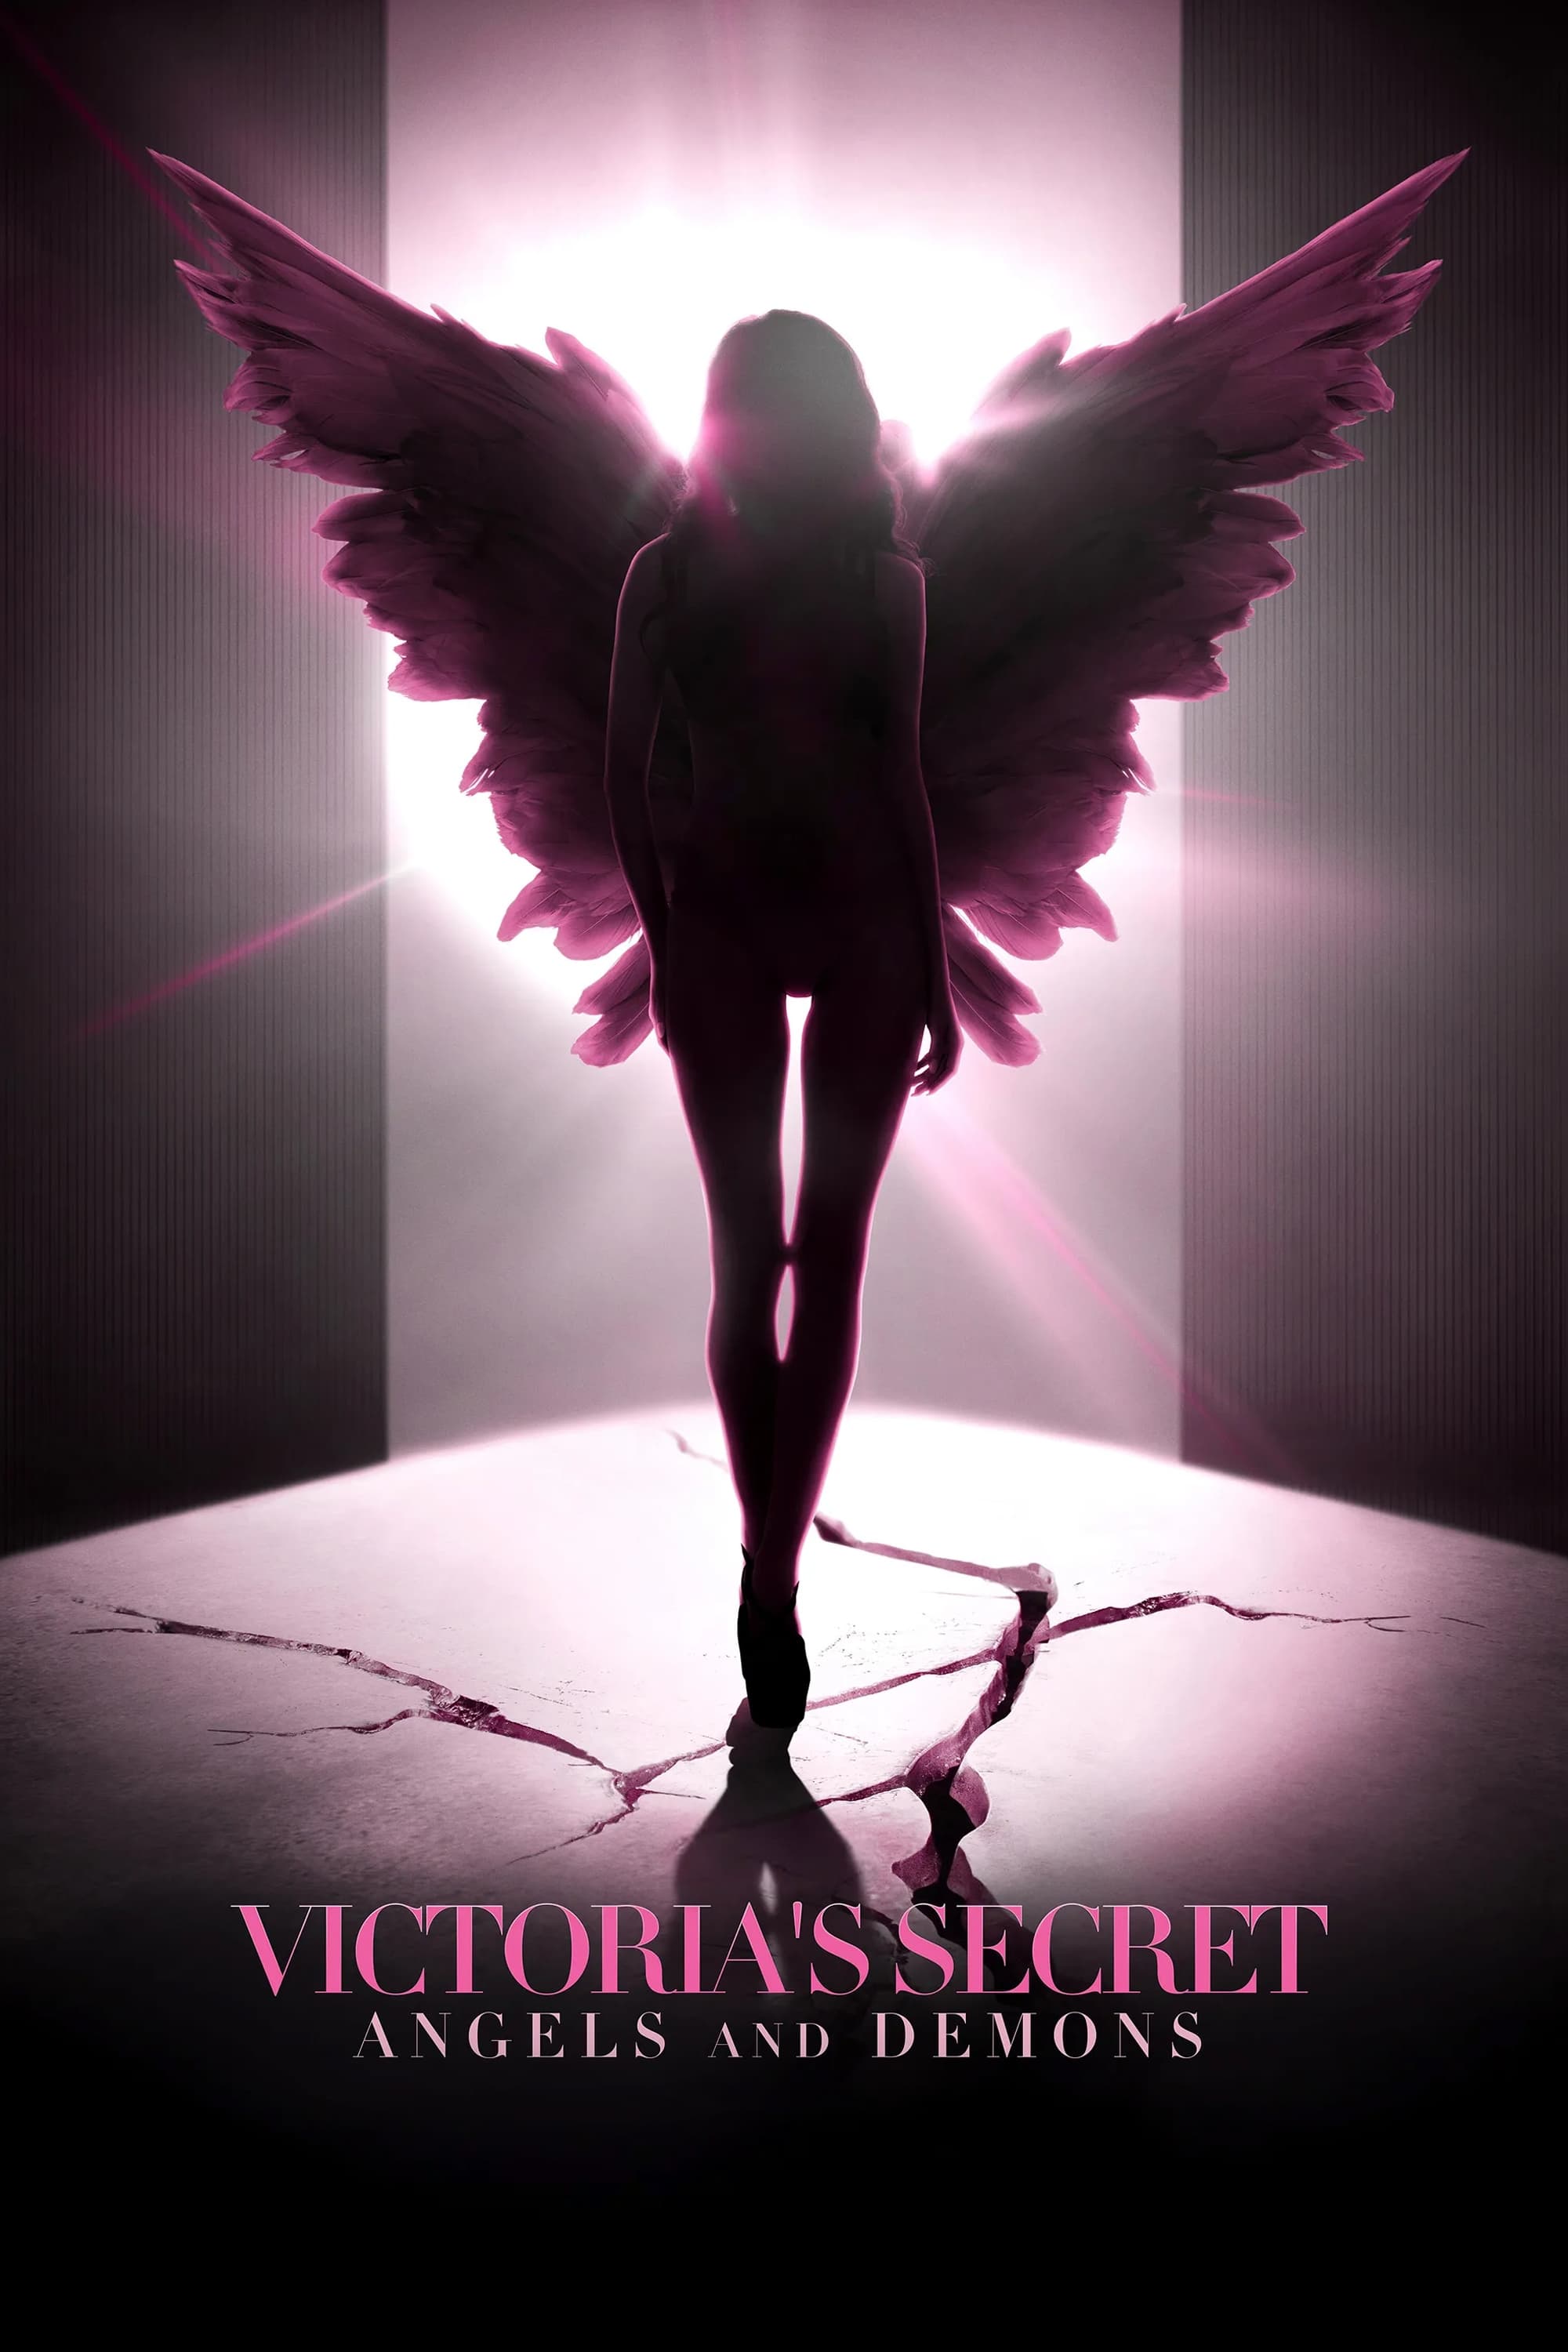 Victoria's Secret: Angels and Demons TV Shows About Abuse